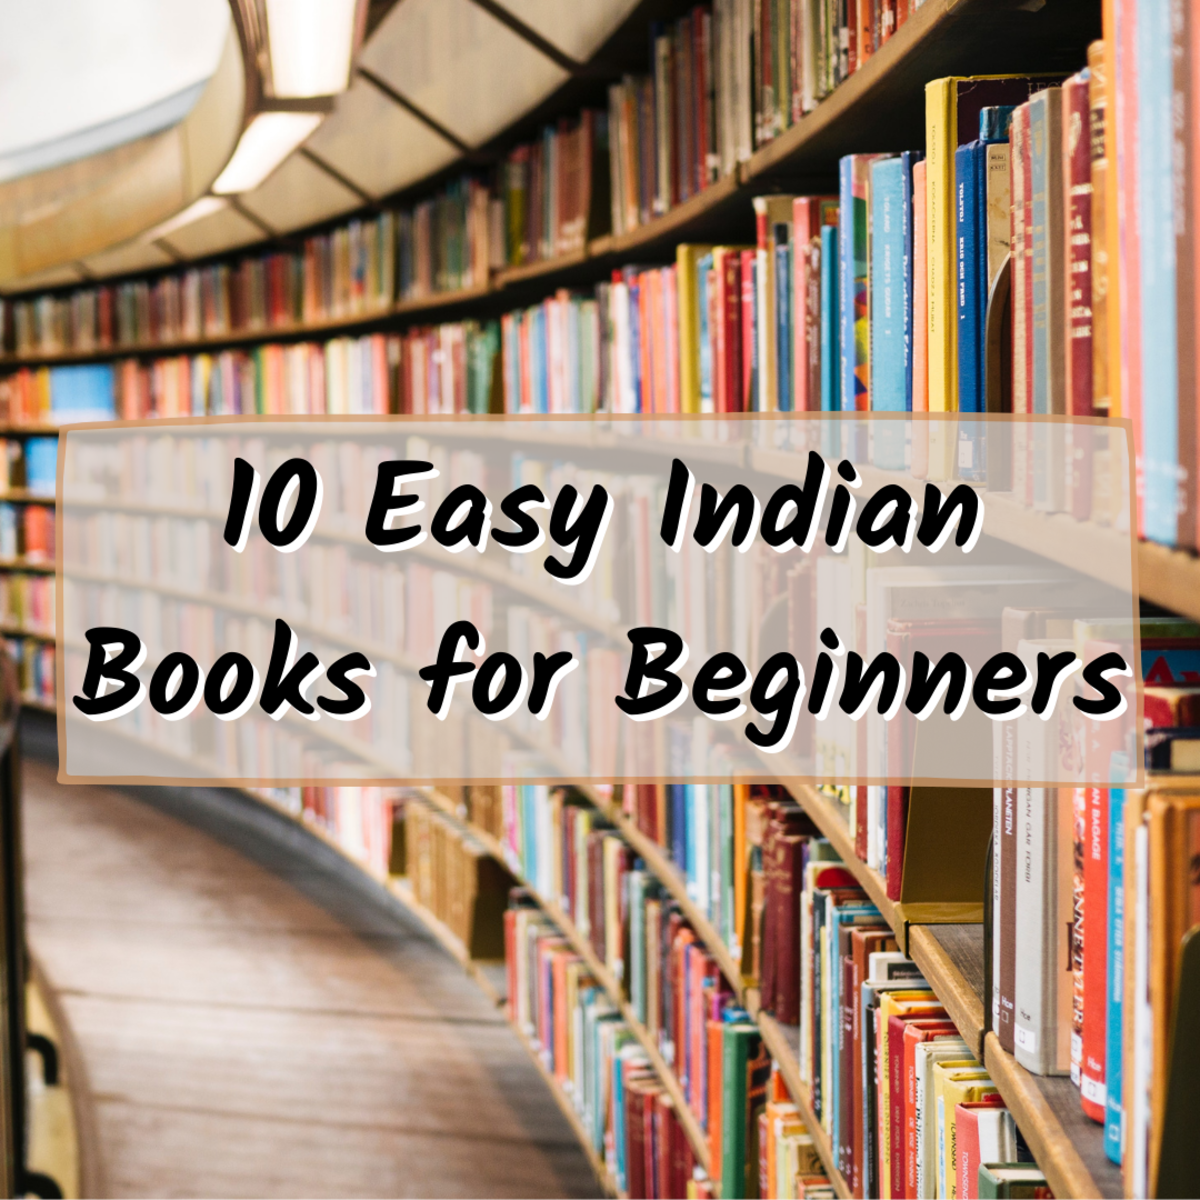 10 Easy Indian Books for Beginners